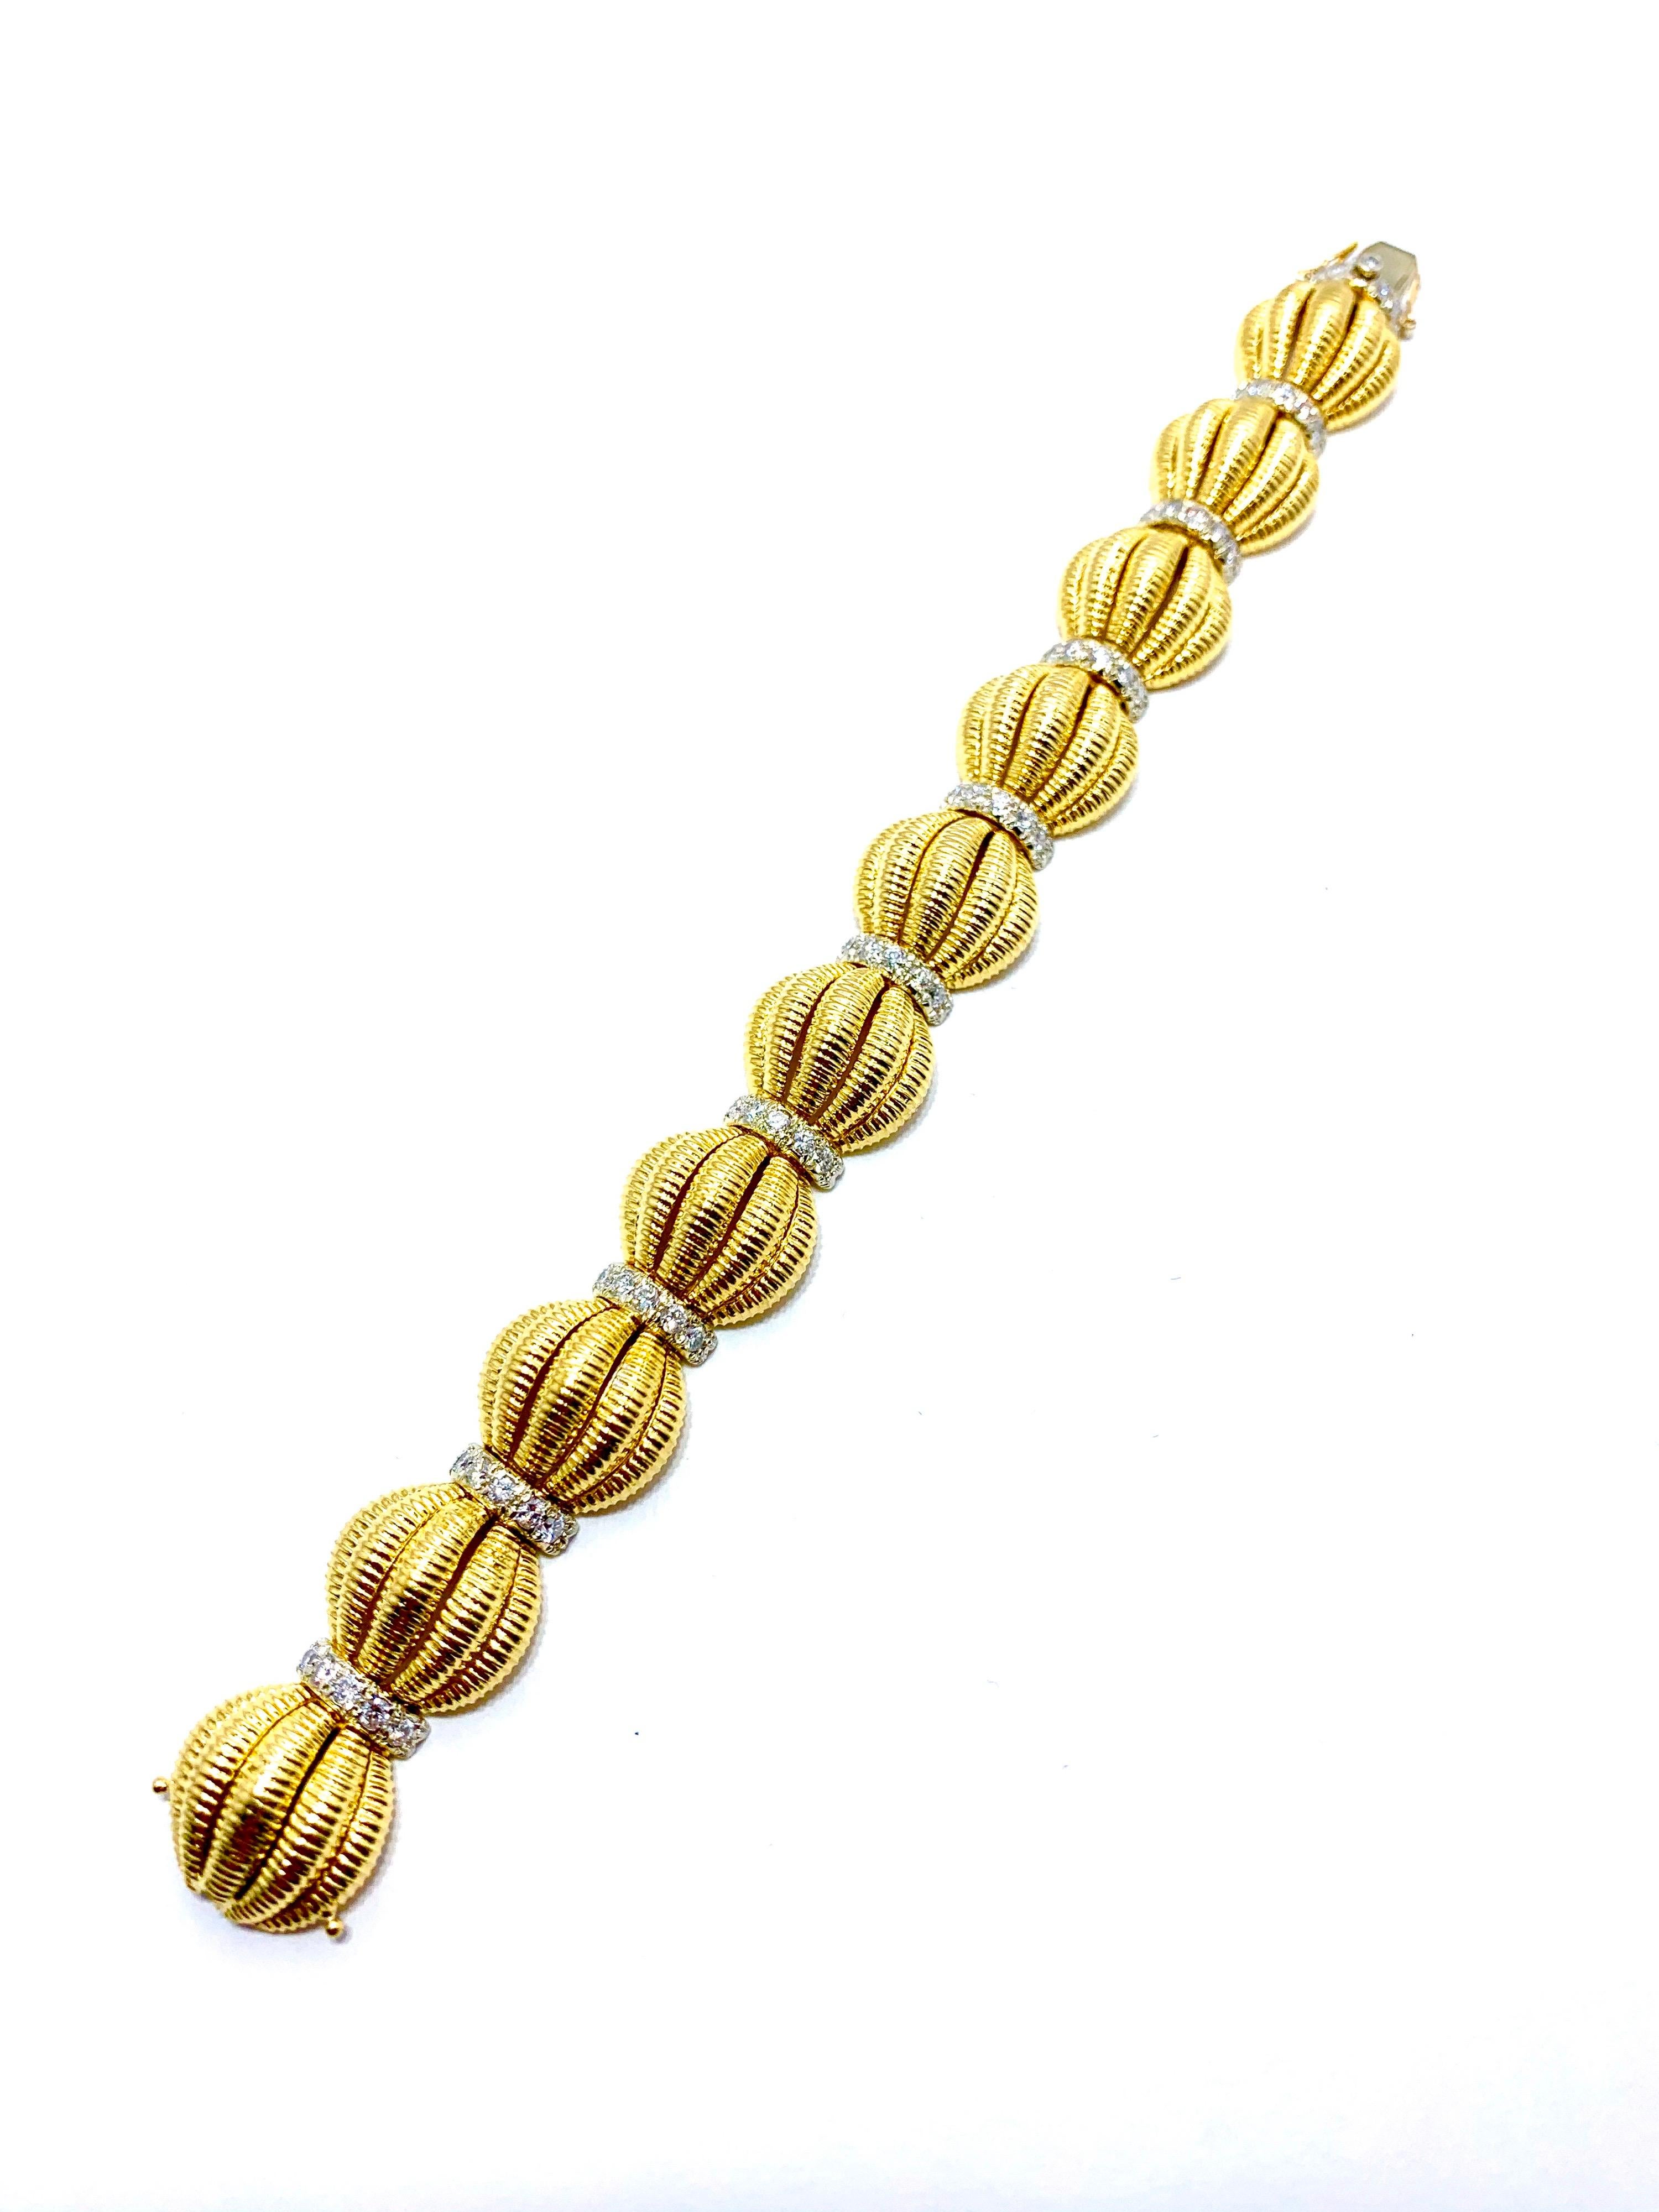 Retro Tiffany & Co. 2.50 Carat Round Diamond and Domed Textured Gold Link Bracelet